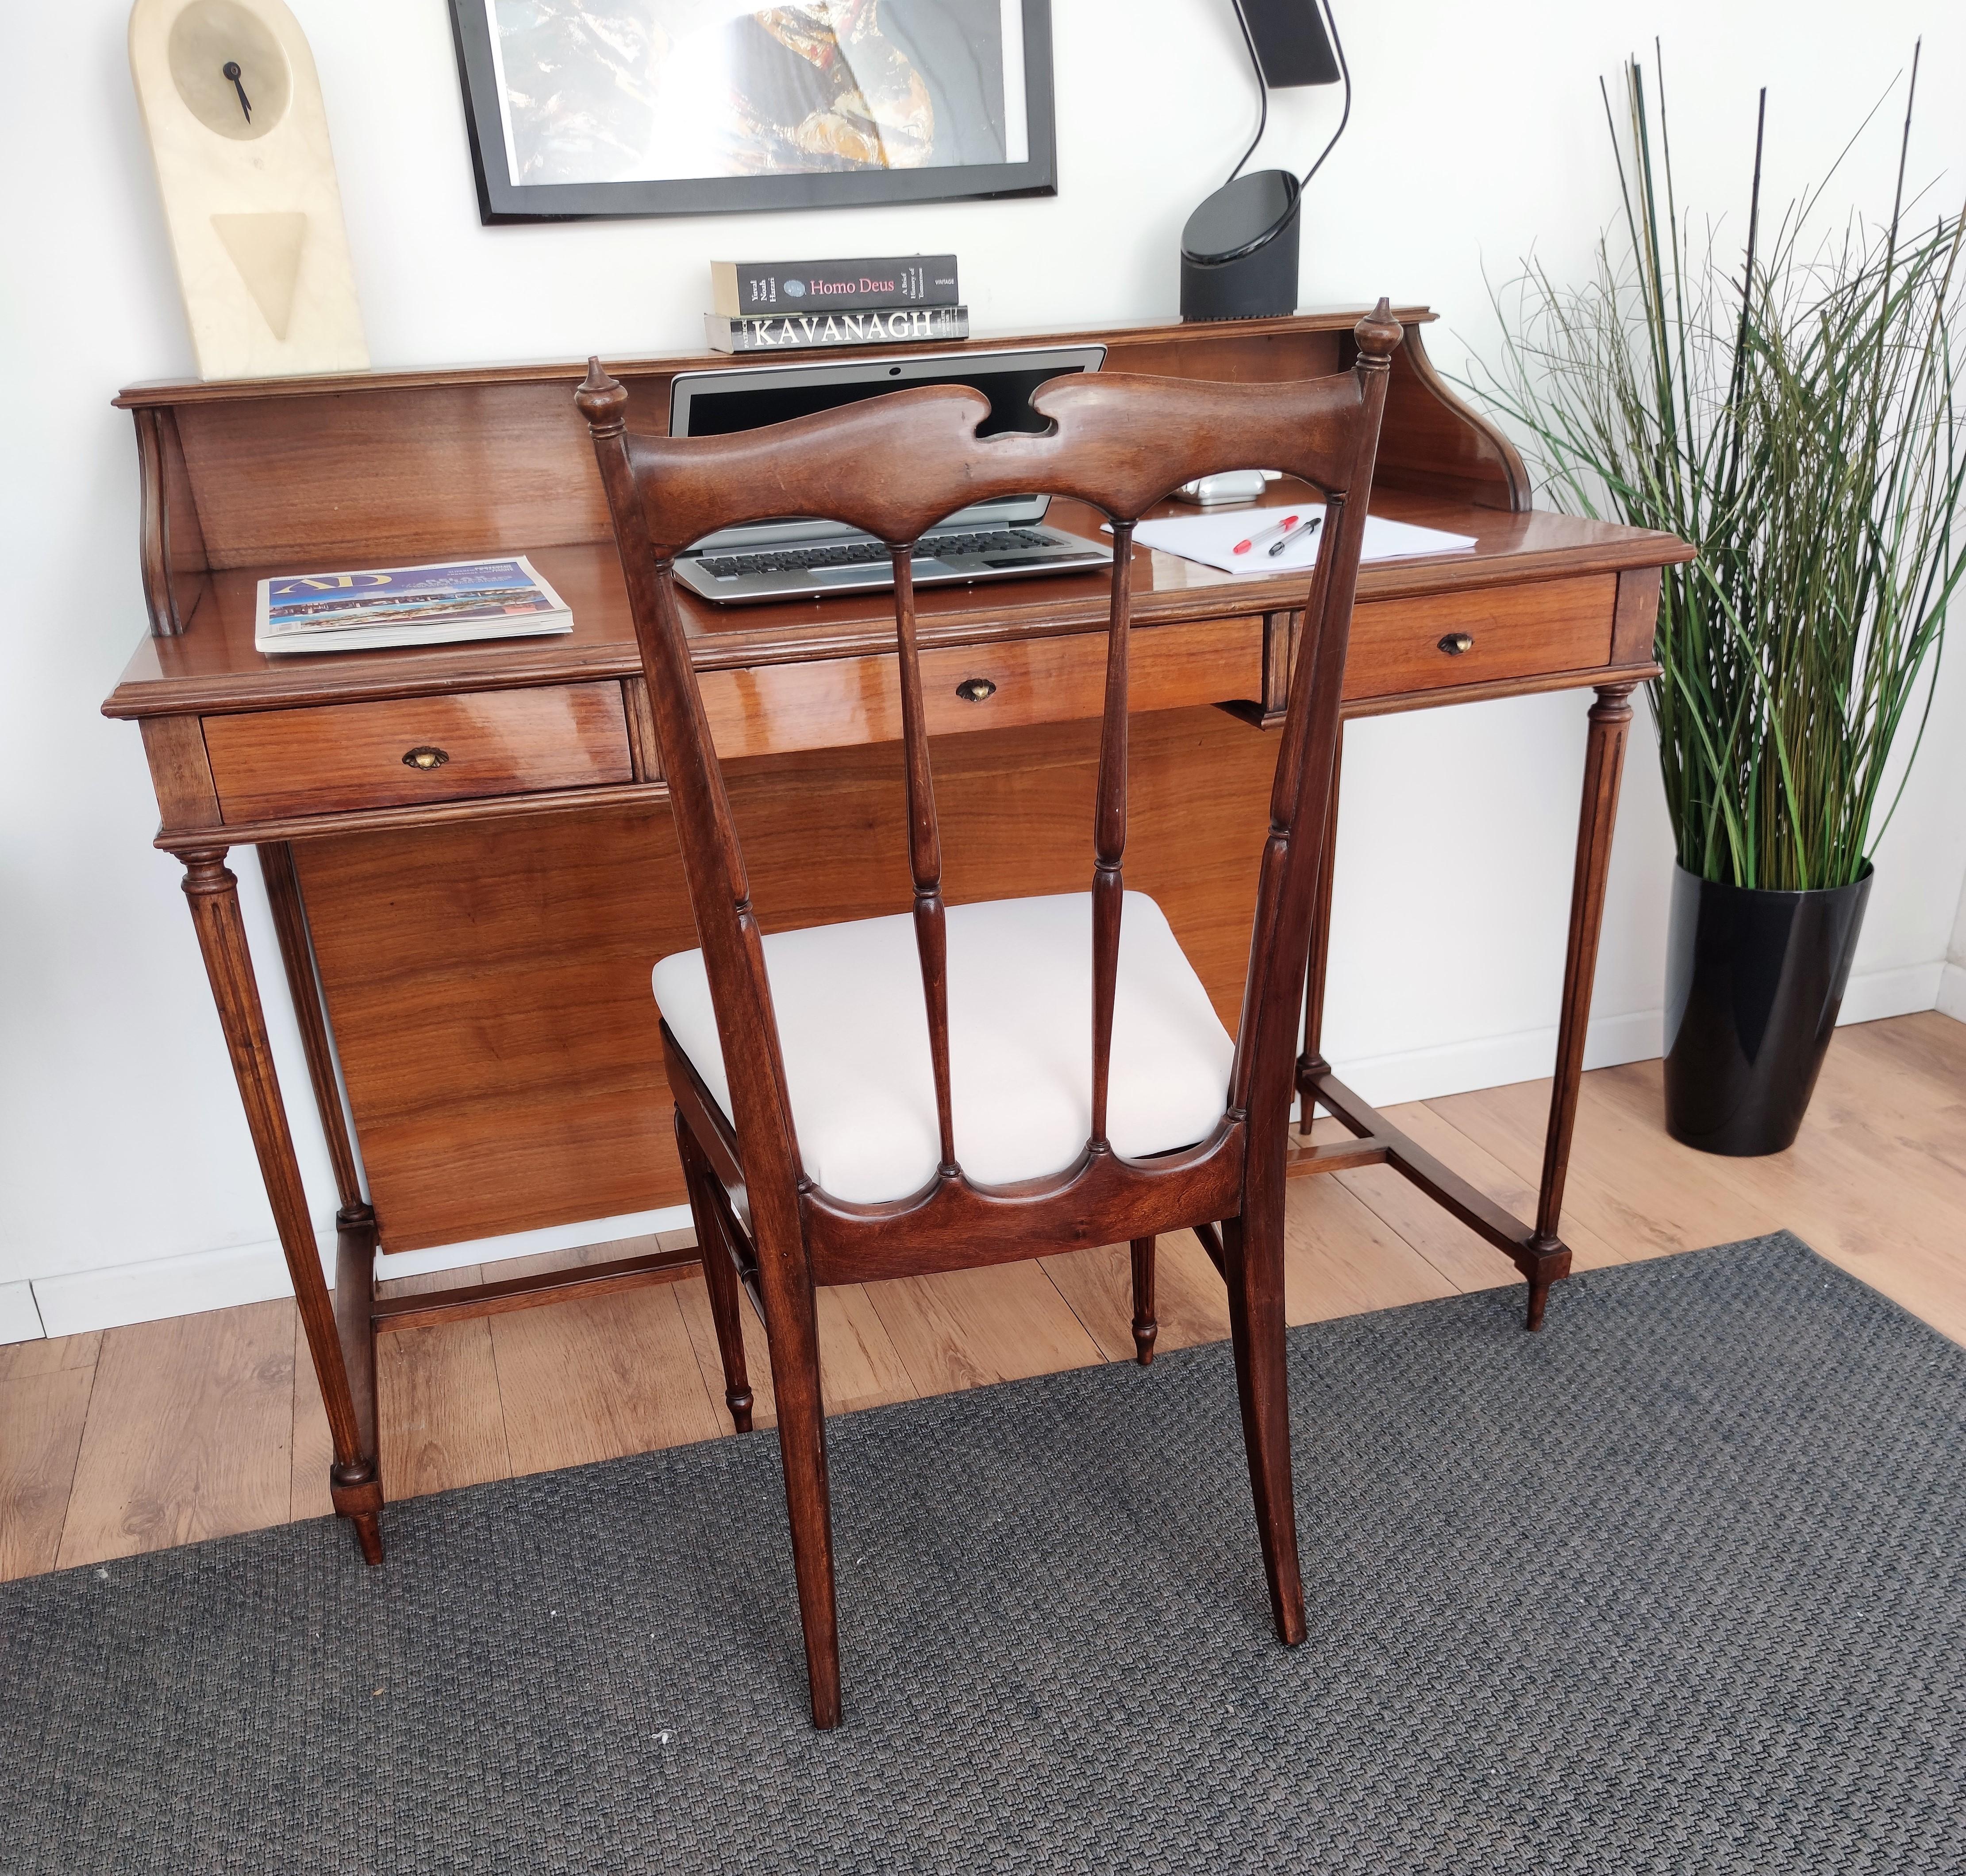 1950s Italian Mid-Century Modern Regency Desk Writing Table and Chair For Sale 3